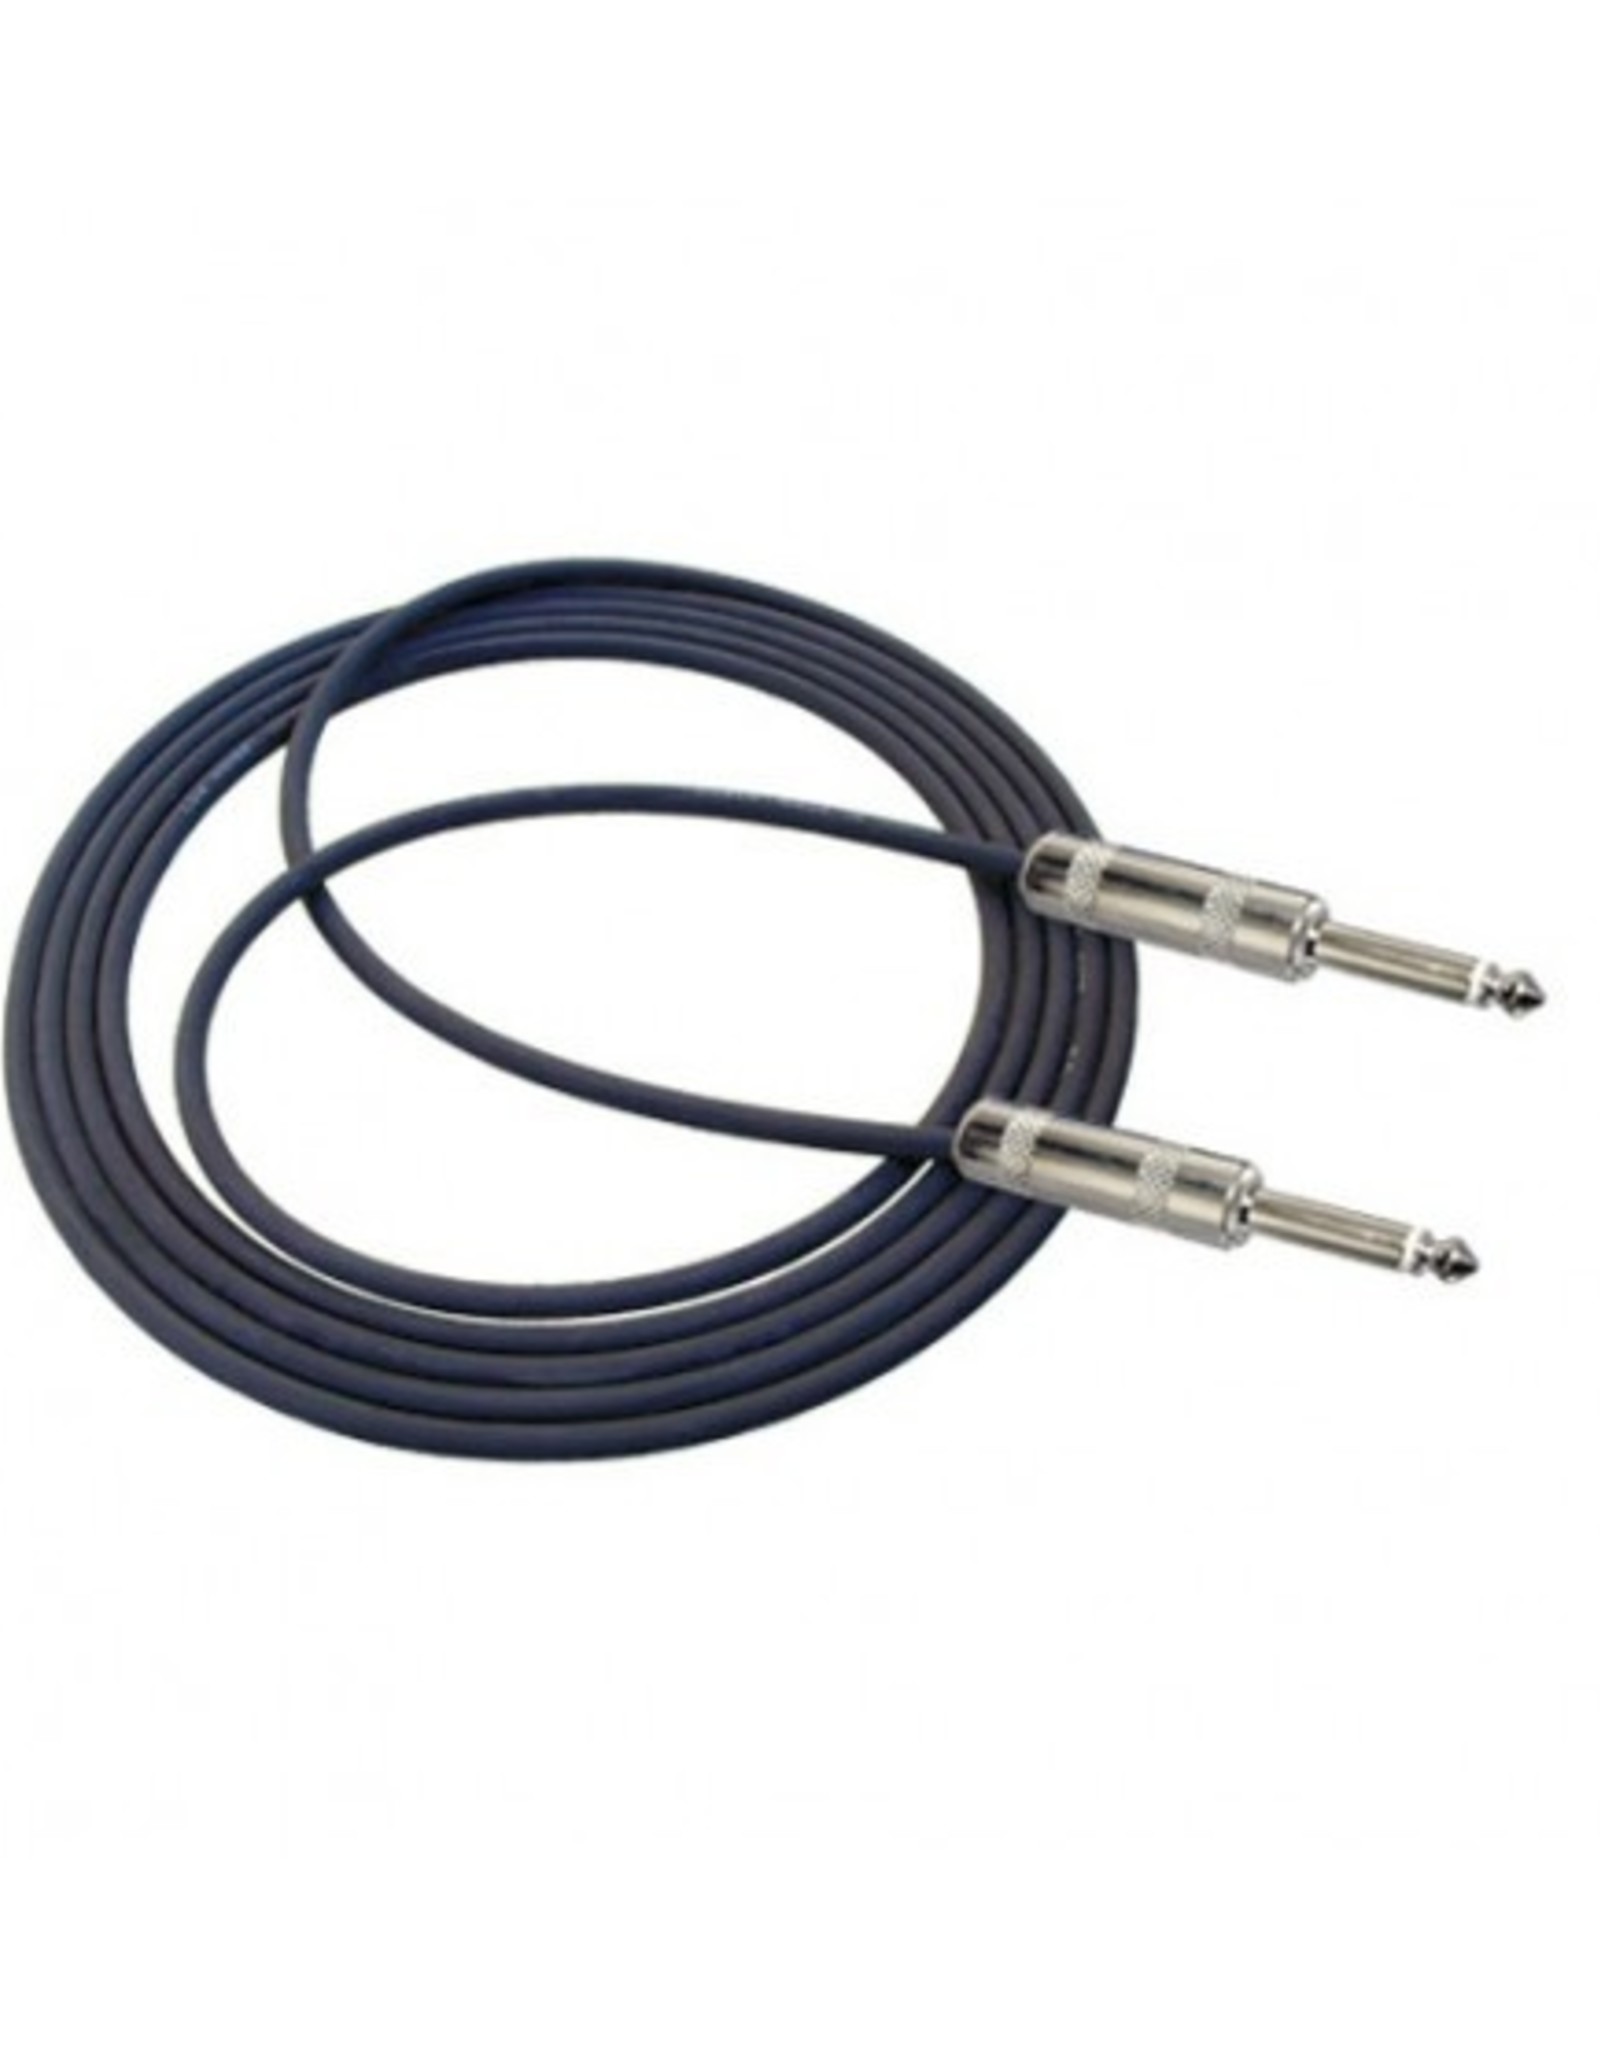 Rapco 1/4" to 1/4" Speaker Cable 10 Ft 16 Gauge